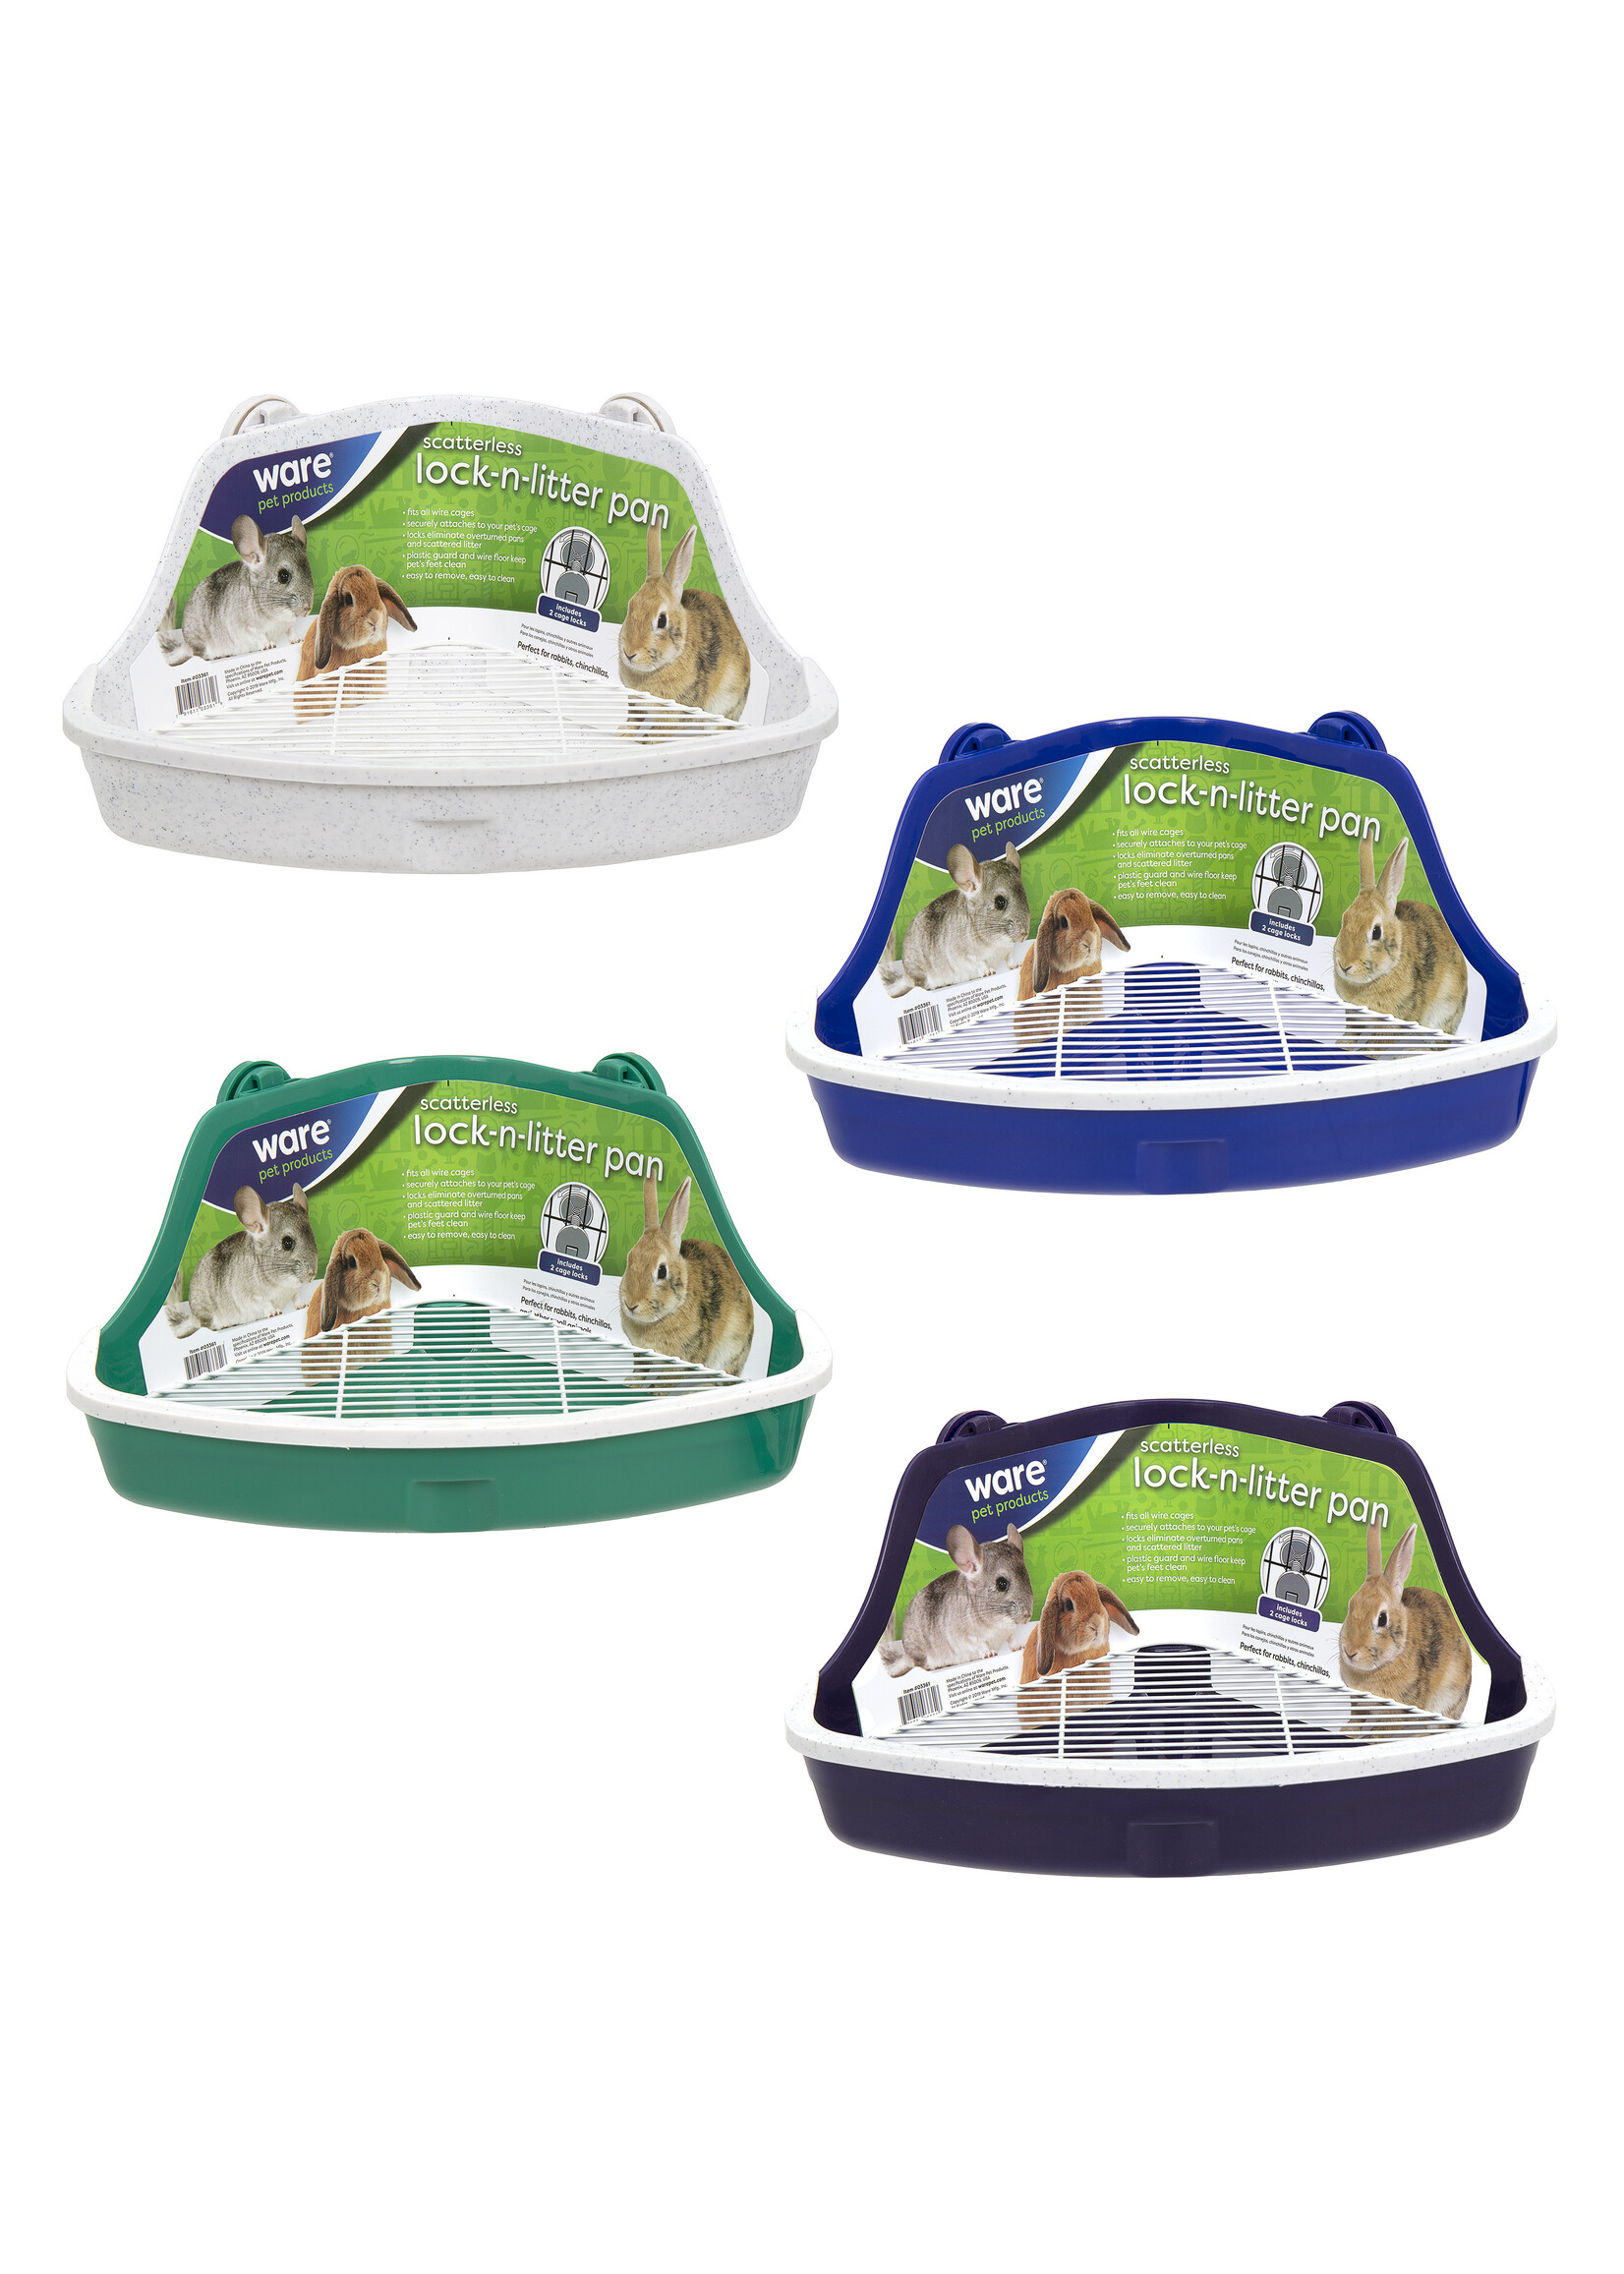 Ware Pet Products Ware Litter Pan Scatterless Assorted